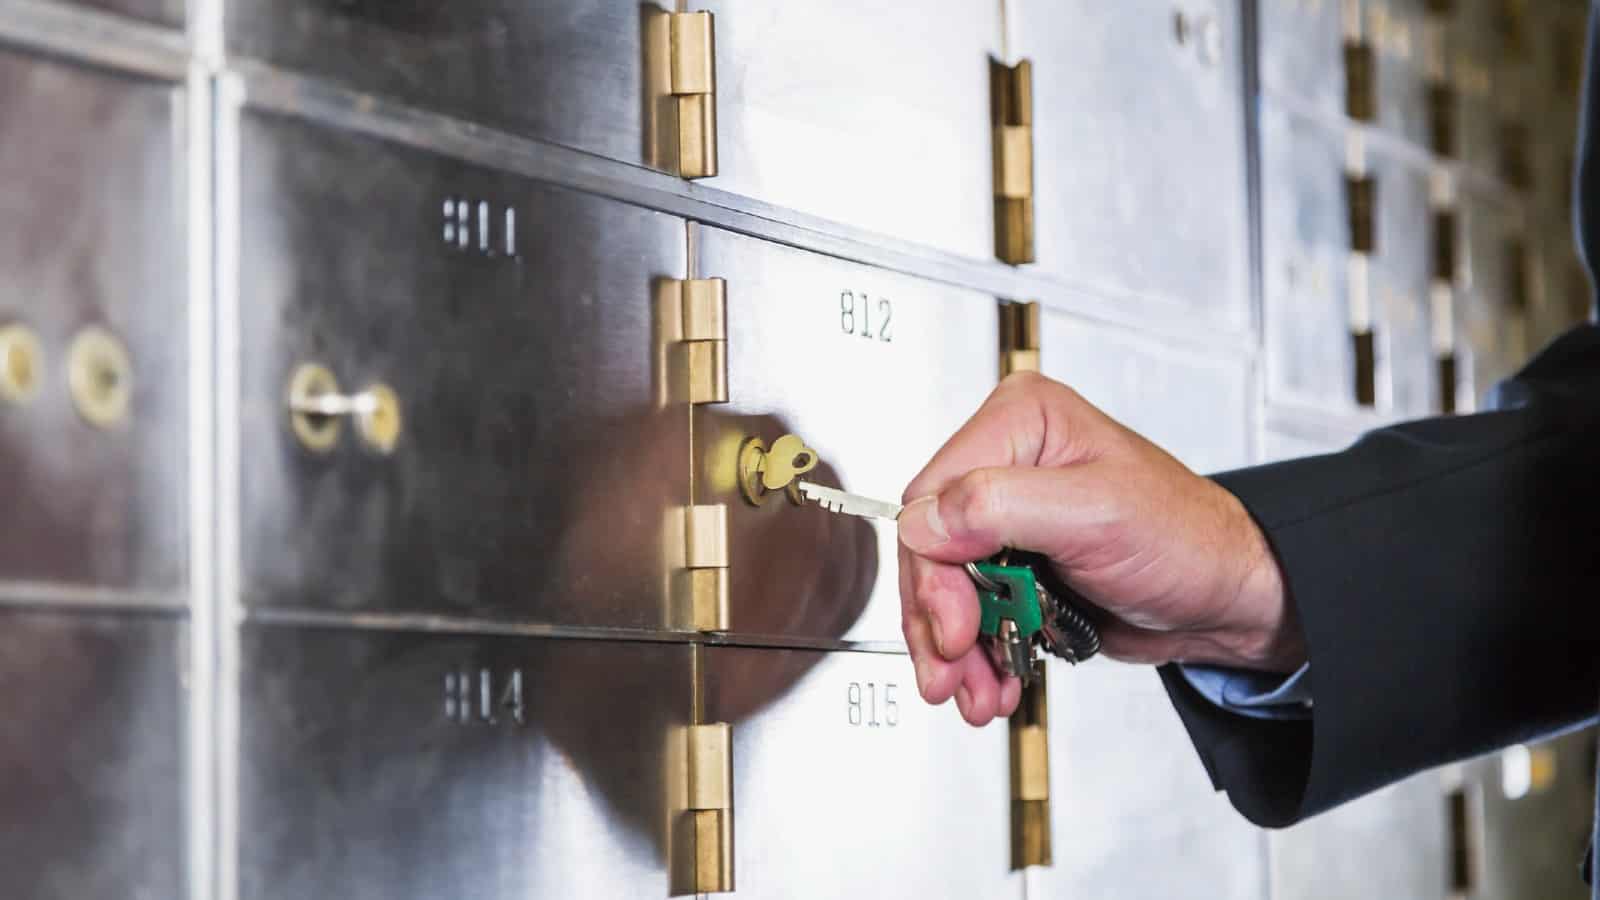 Hand of a mature man opening a safety deposit box.